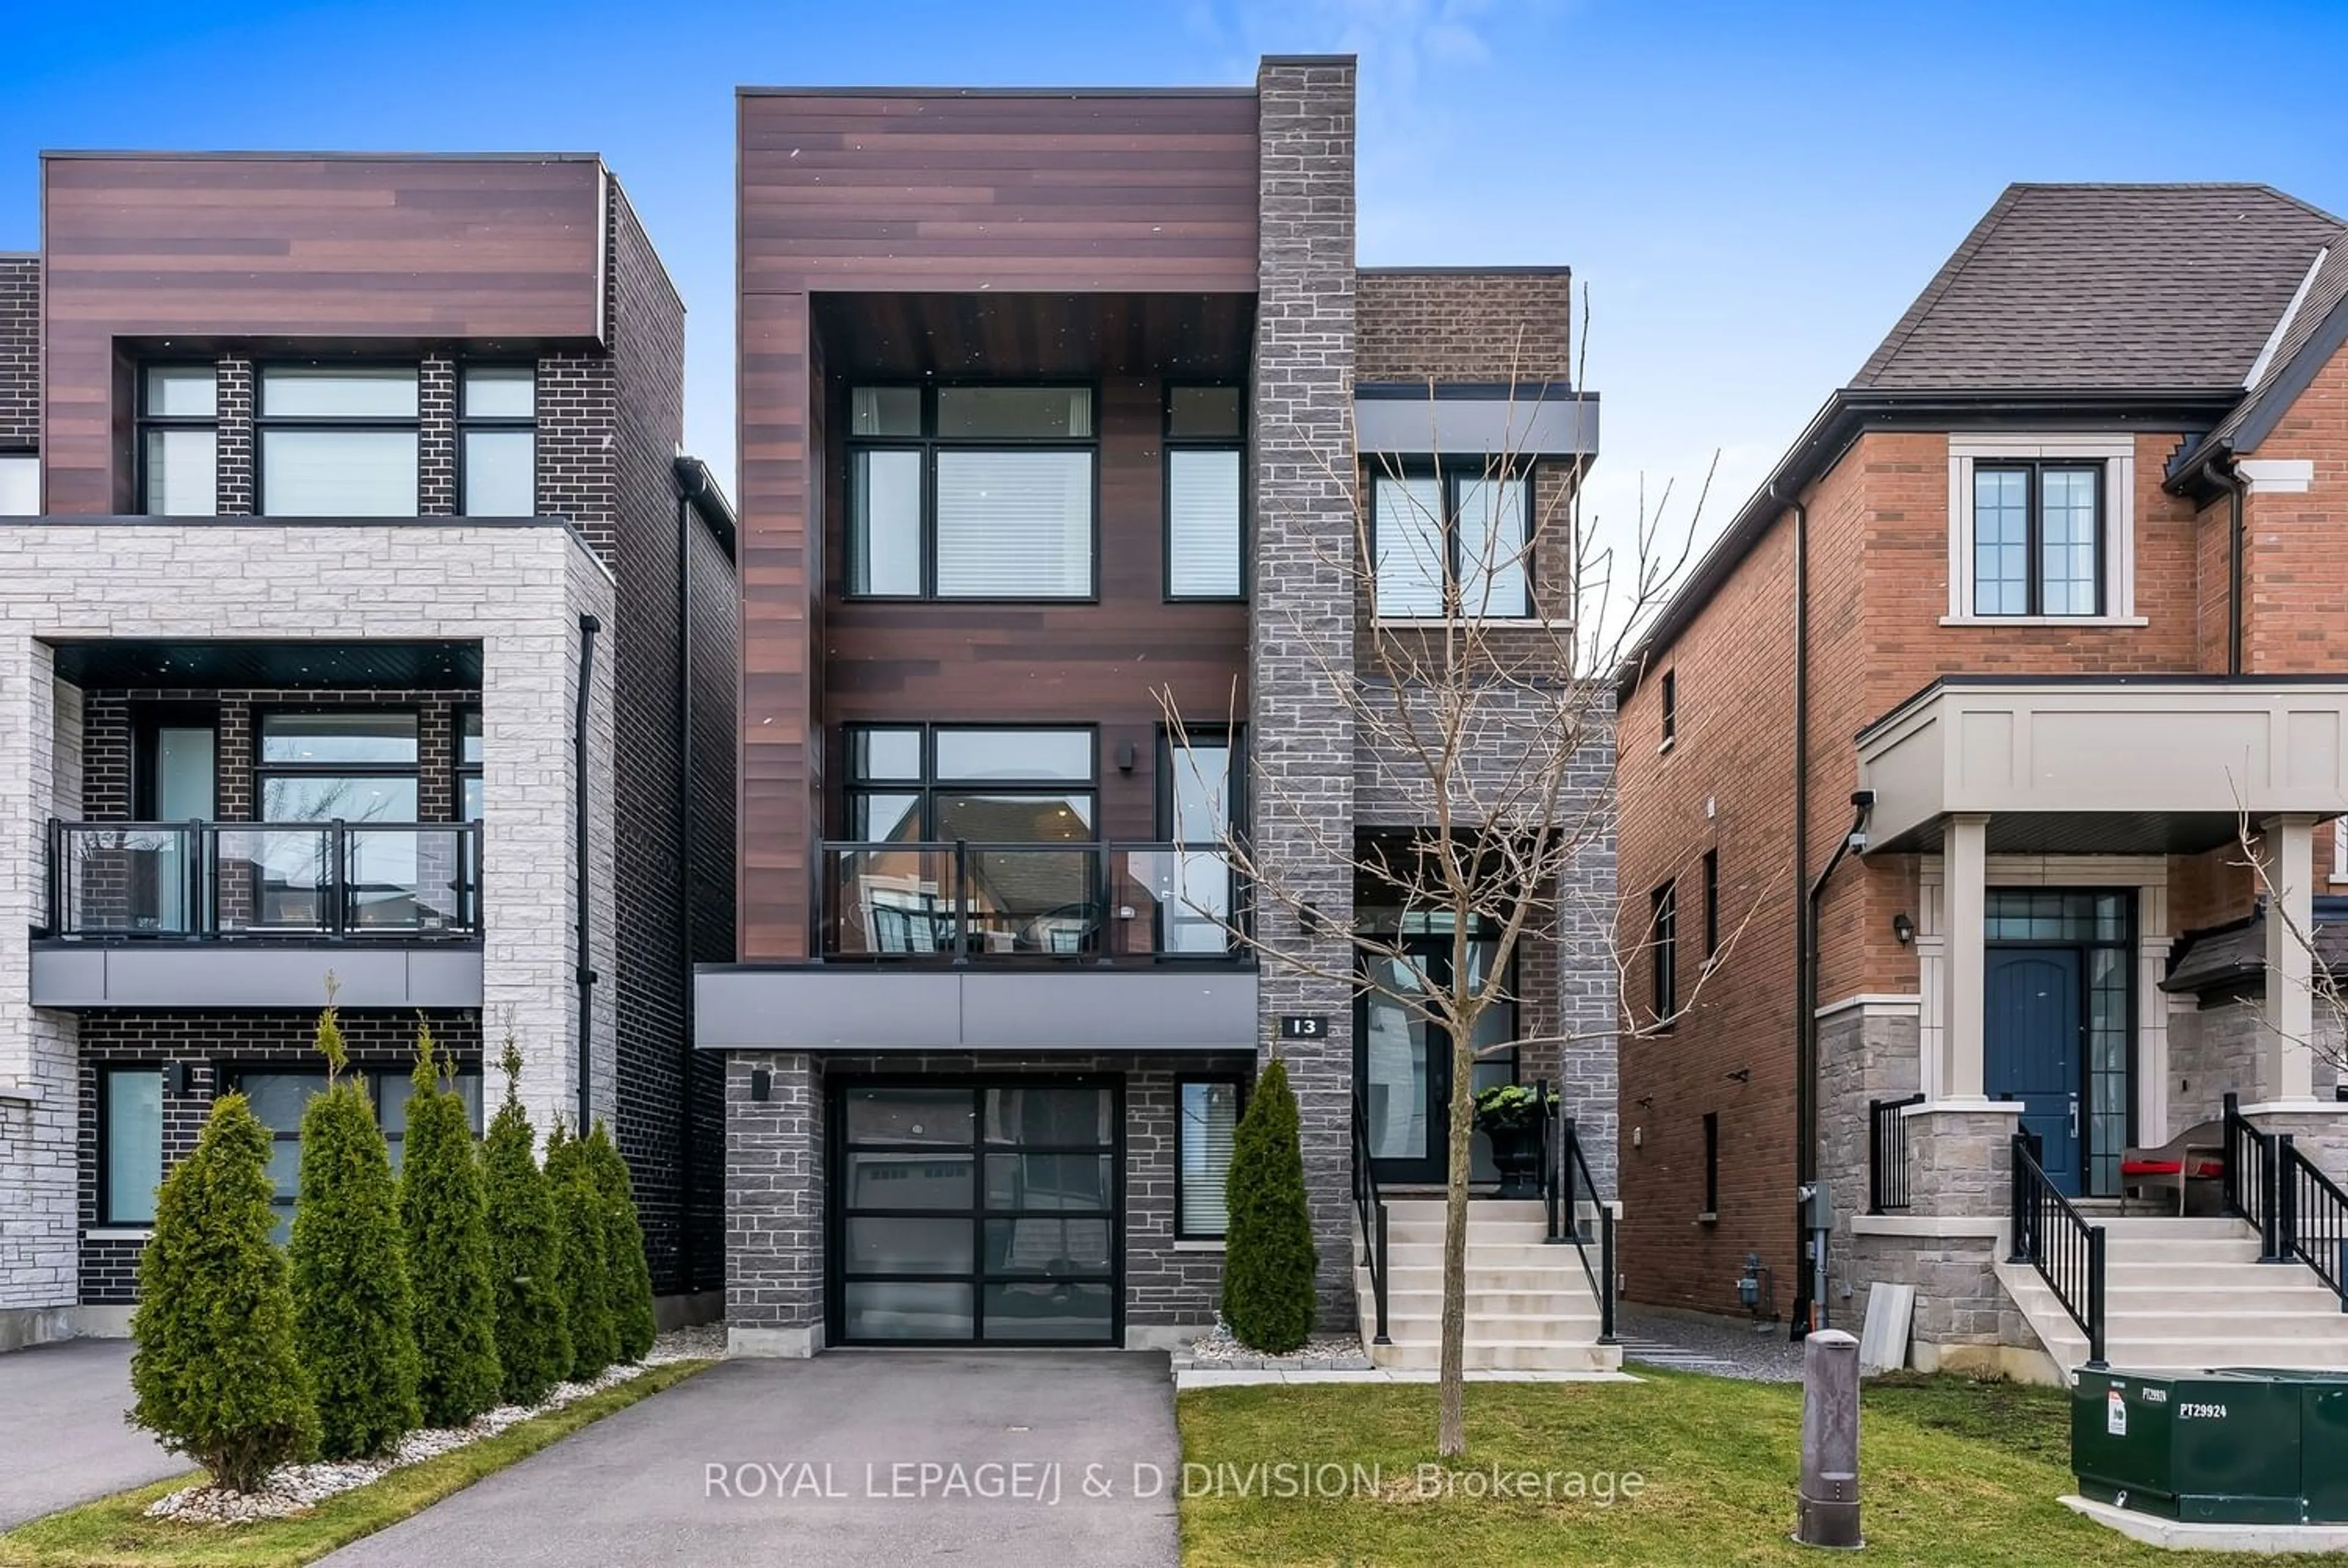 Home with brick exterior material for 13 Chimney Swift Crt, Toronto Ontario M9B 0C6